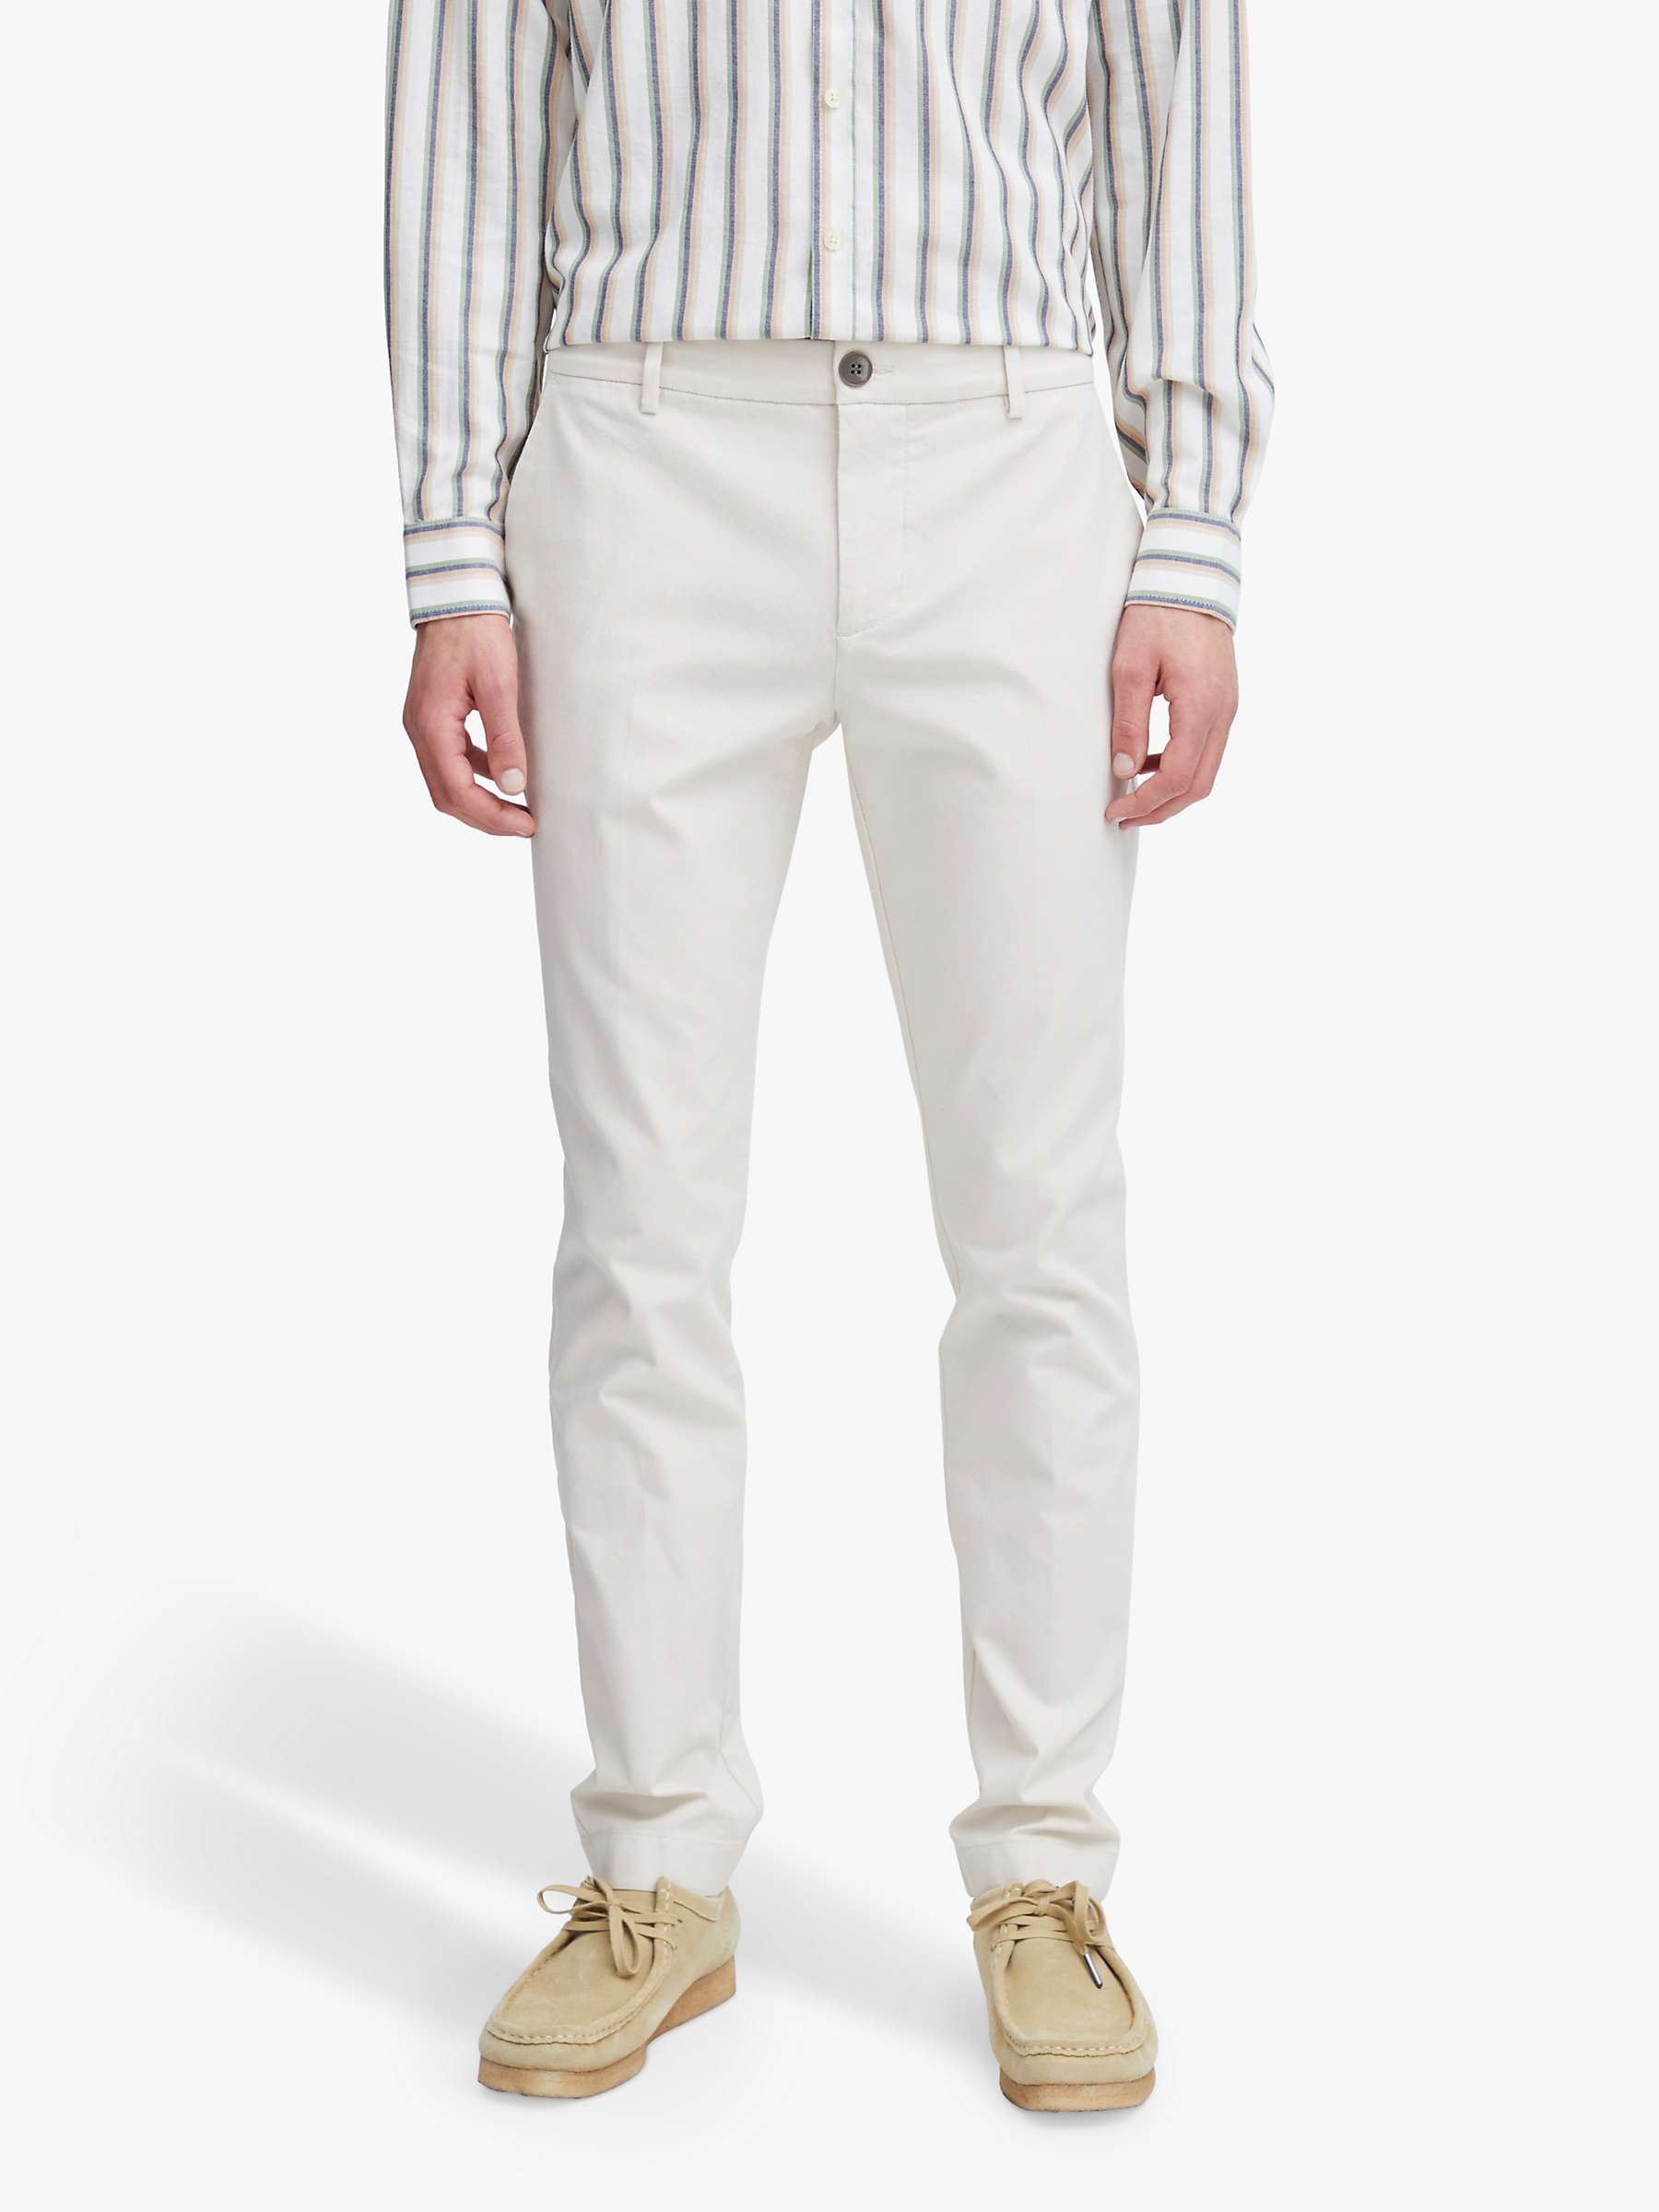 Buy Casual Friday Philip Slim Fit Performance Trousers Online at johnlewis.com